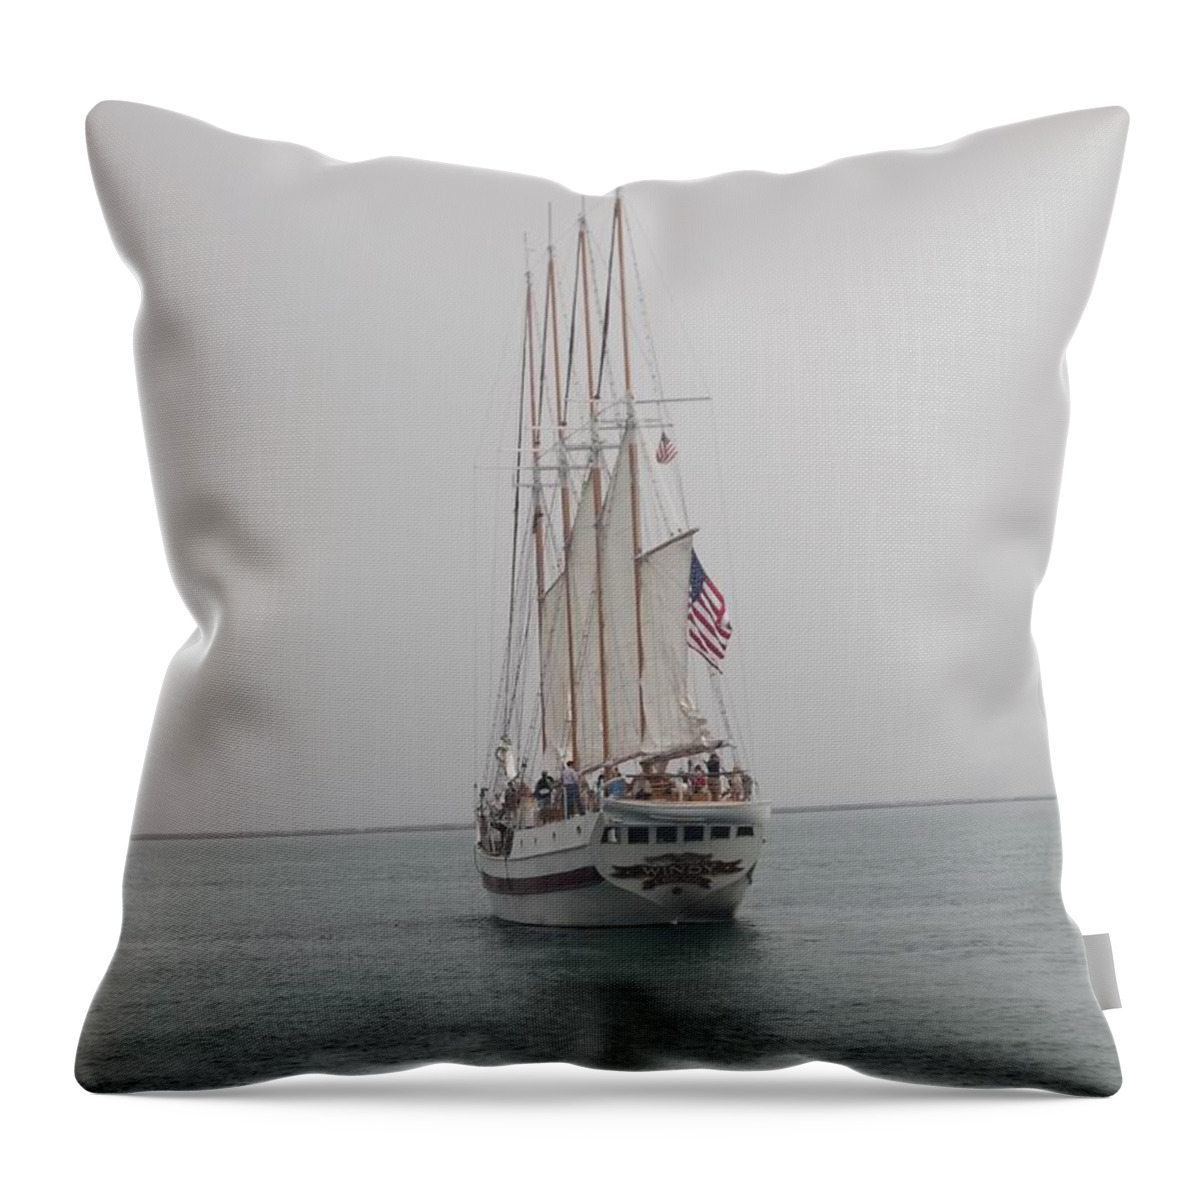 Chicago Throw Pillow featuring the photograph Sailboat by Jennifer Blakeney